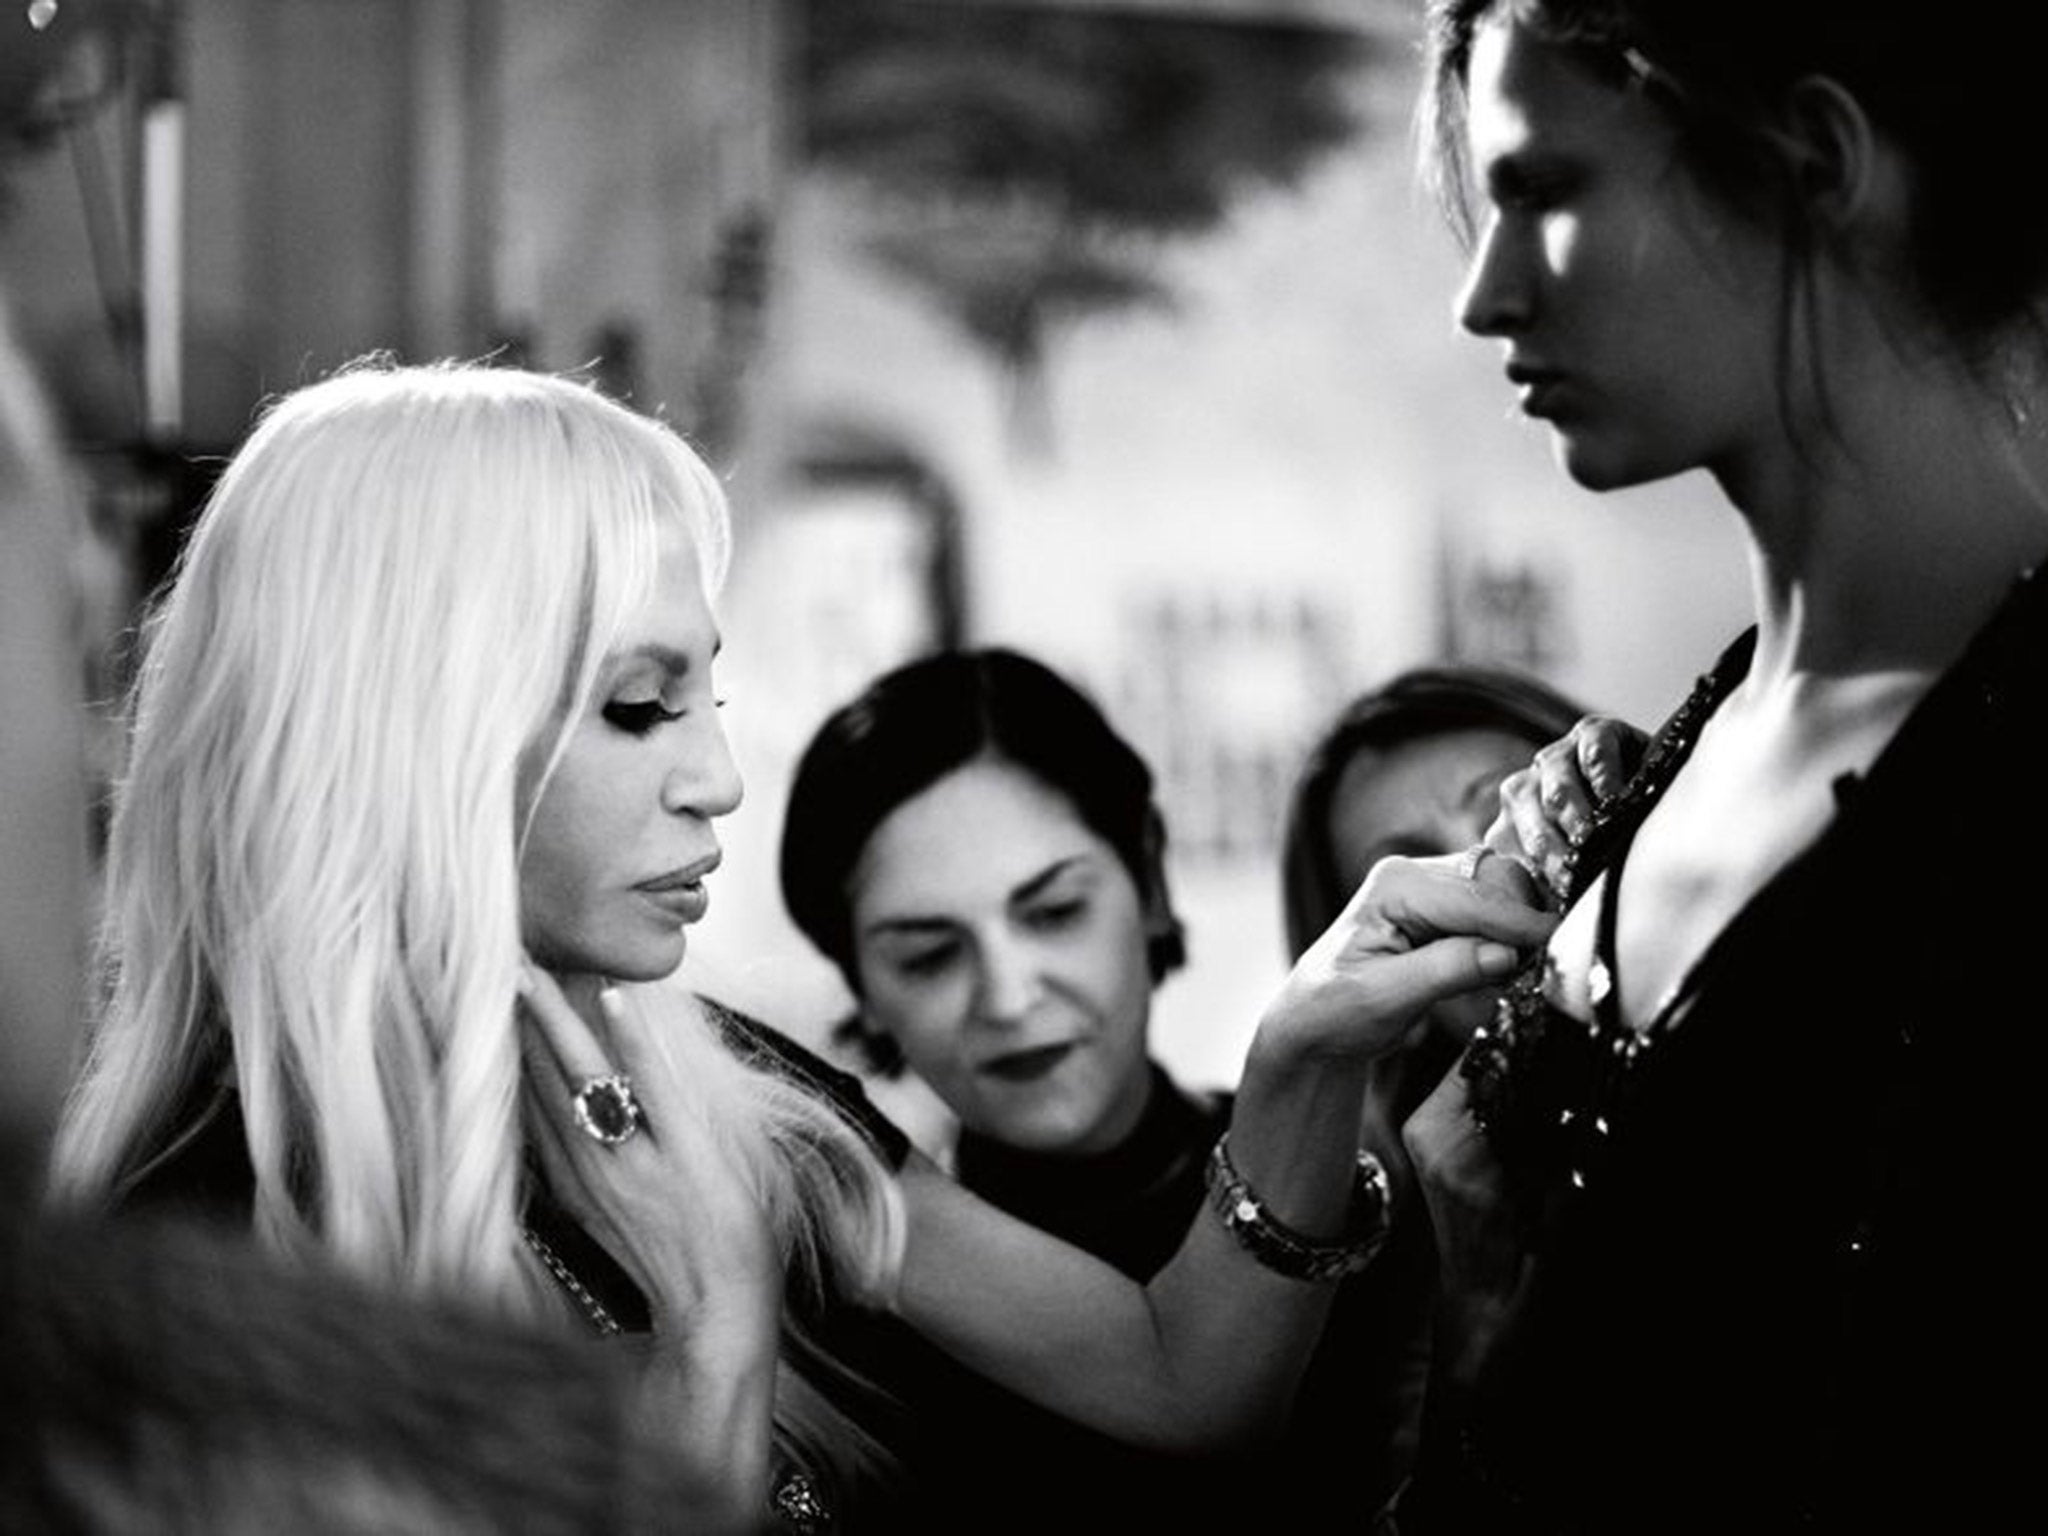 Donatella Versace adjusts a model's intricate clothing during her couture collection